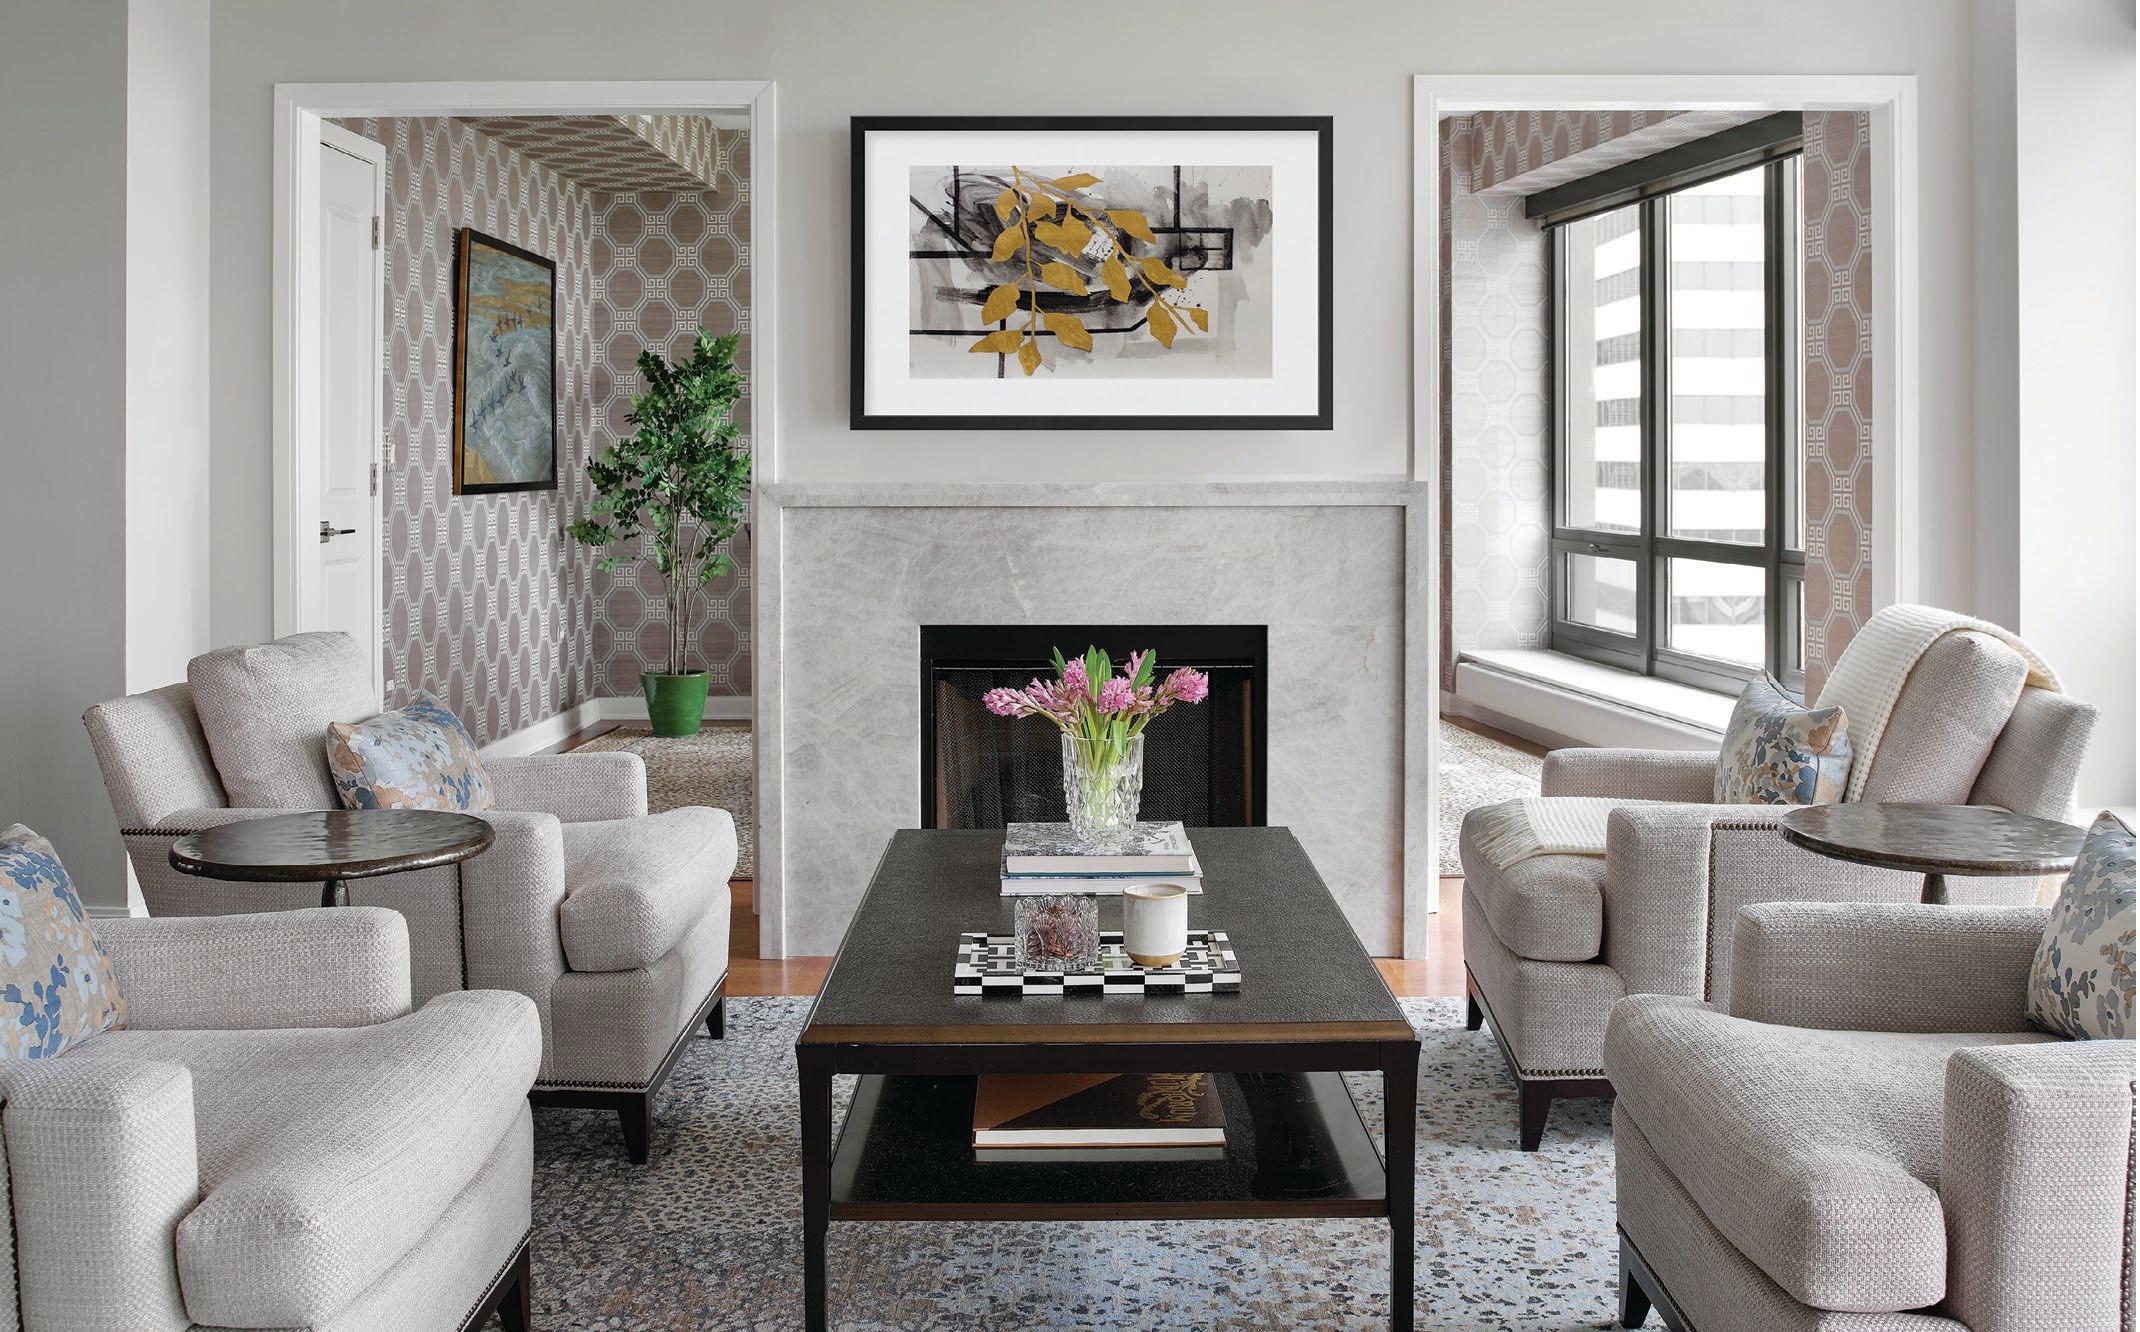 A quartet of 9th Street chairs by Hickory Chairs in fabric by Calico Corners sets a chicly neutral vibe in the living room, which also features a fireplace surround custom-designed and fabricated by Tamazula Granite in Taj Mahal quartzite from MSI Surfaces PHOTOGRAPHED BY Gynthia Lynn